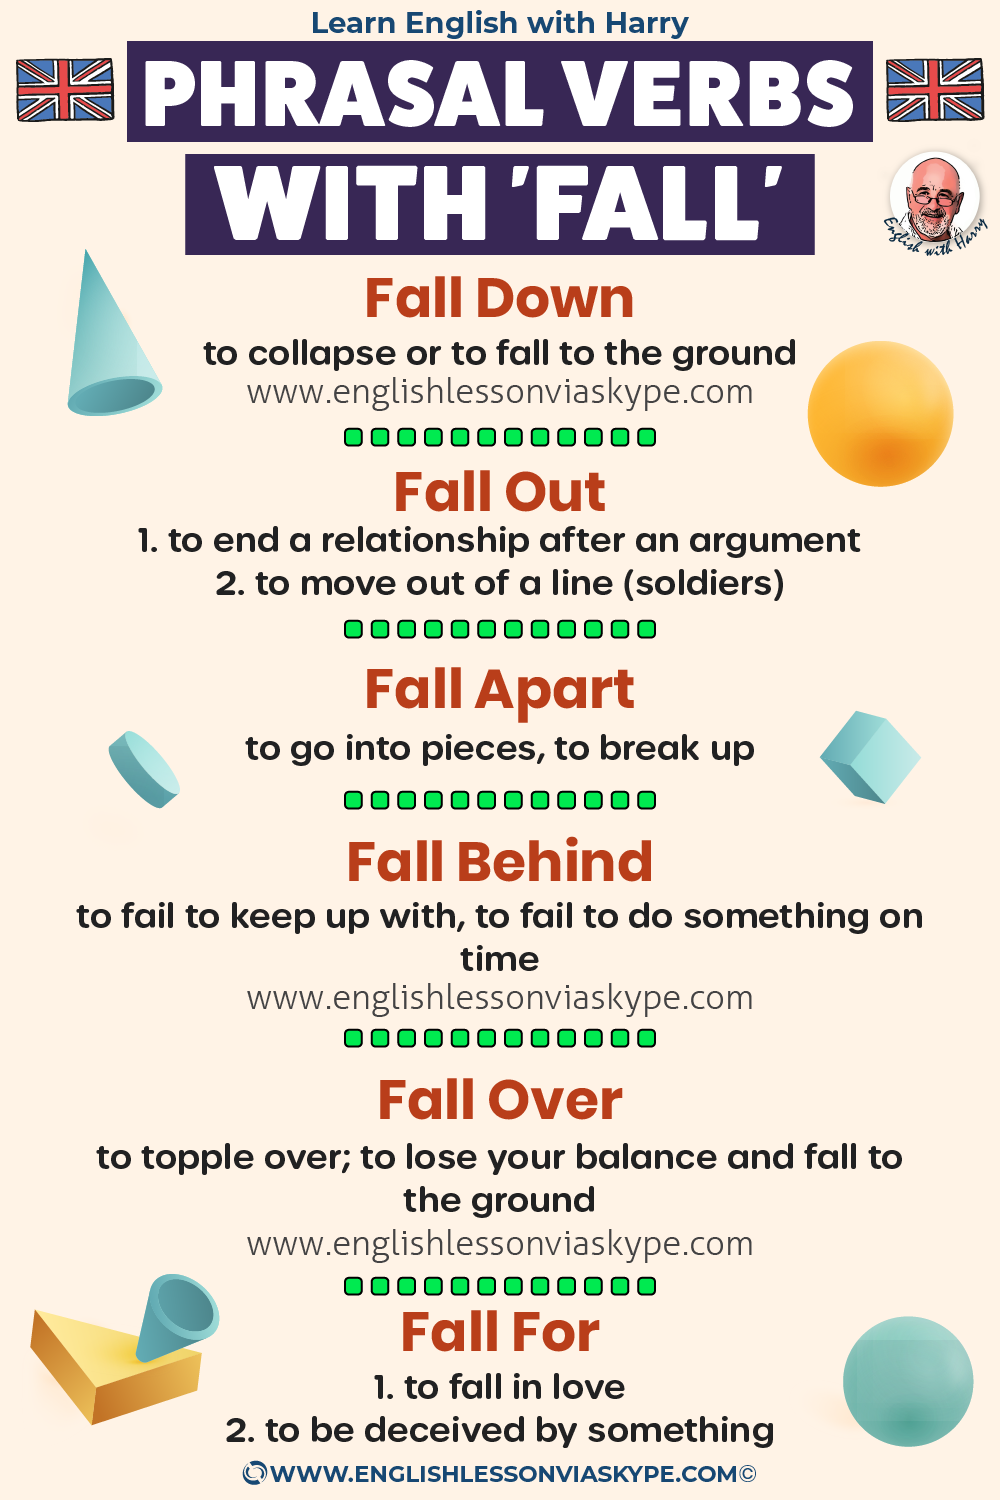 14 Phrasal verbs with Fall. Advanced English learning. Online English lessons on Zoom. Study advanced English at www.englishlessonviaskype.com